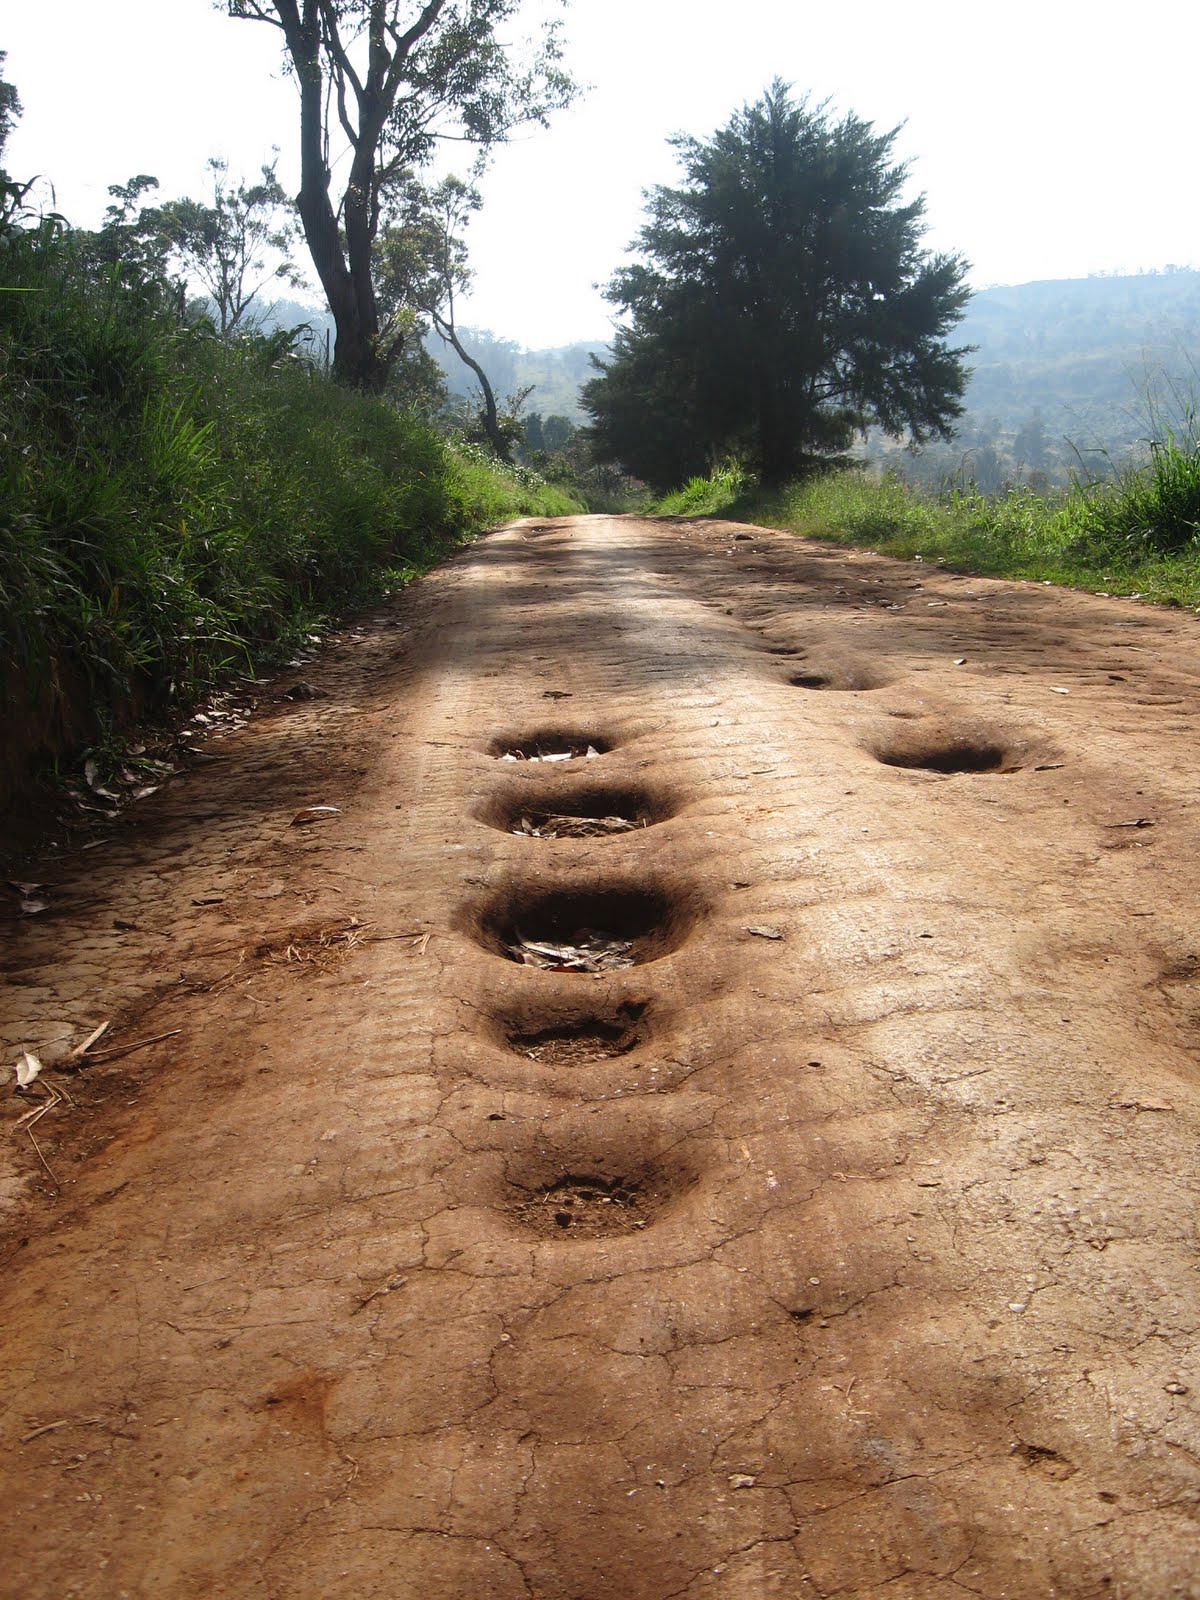 cameroun m'inspire: now these are the types of roads a 4x4 would love